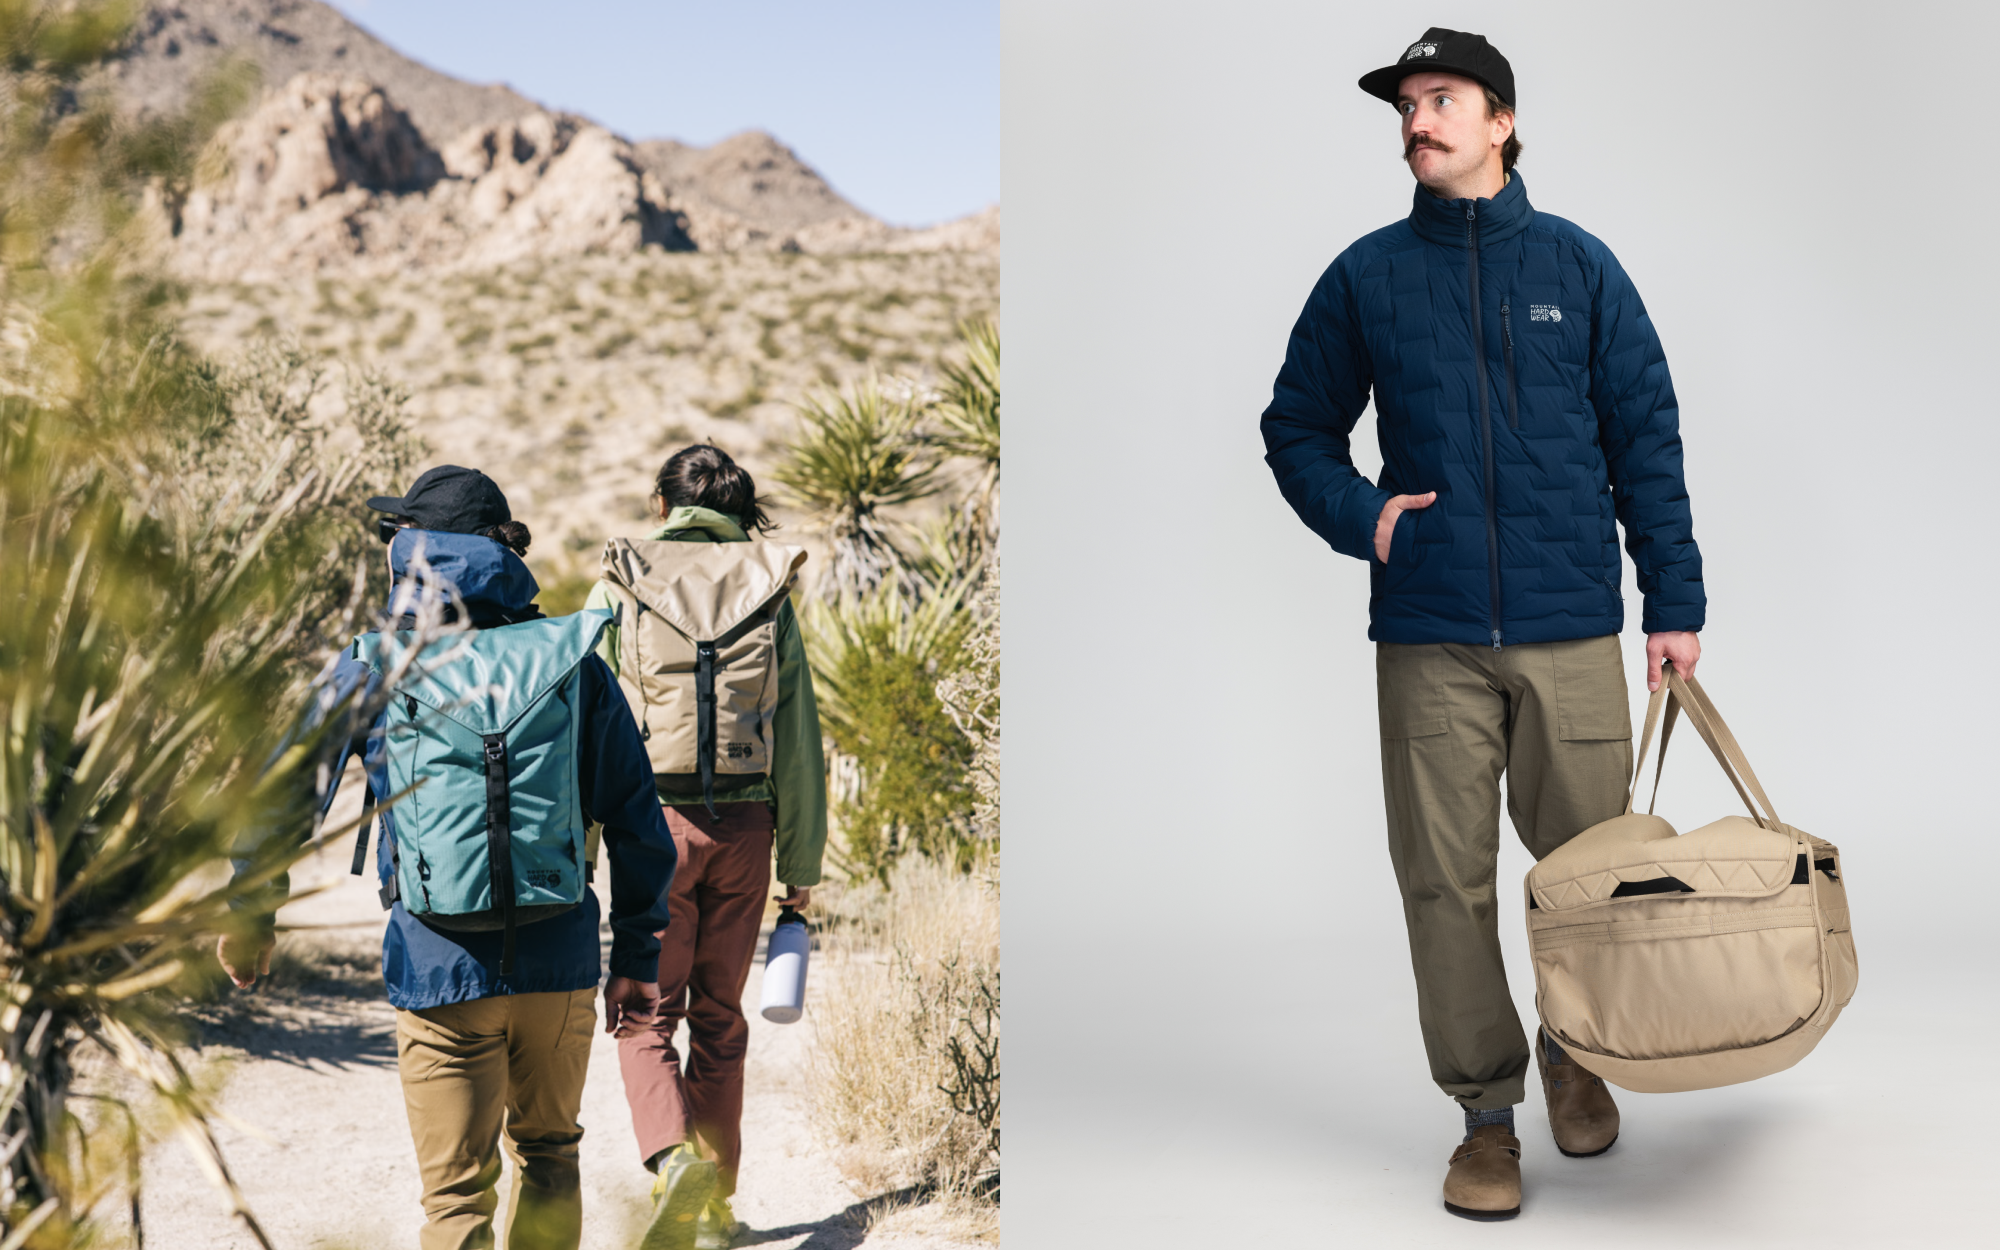 Two images side by side, the first has two hikers on a trail in the desert. The second image is a studio shot of a camp downtime kit.